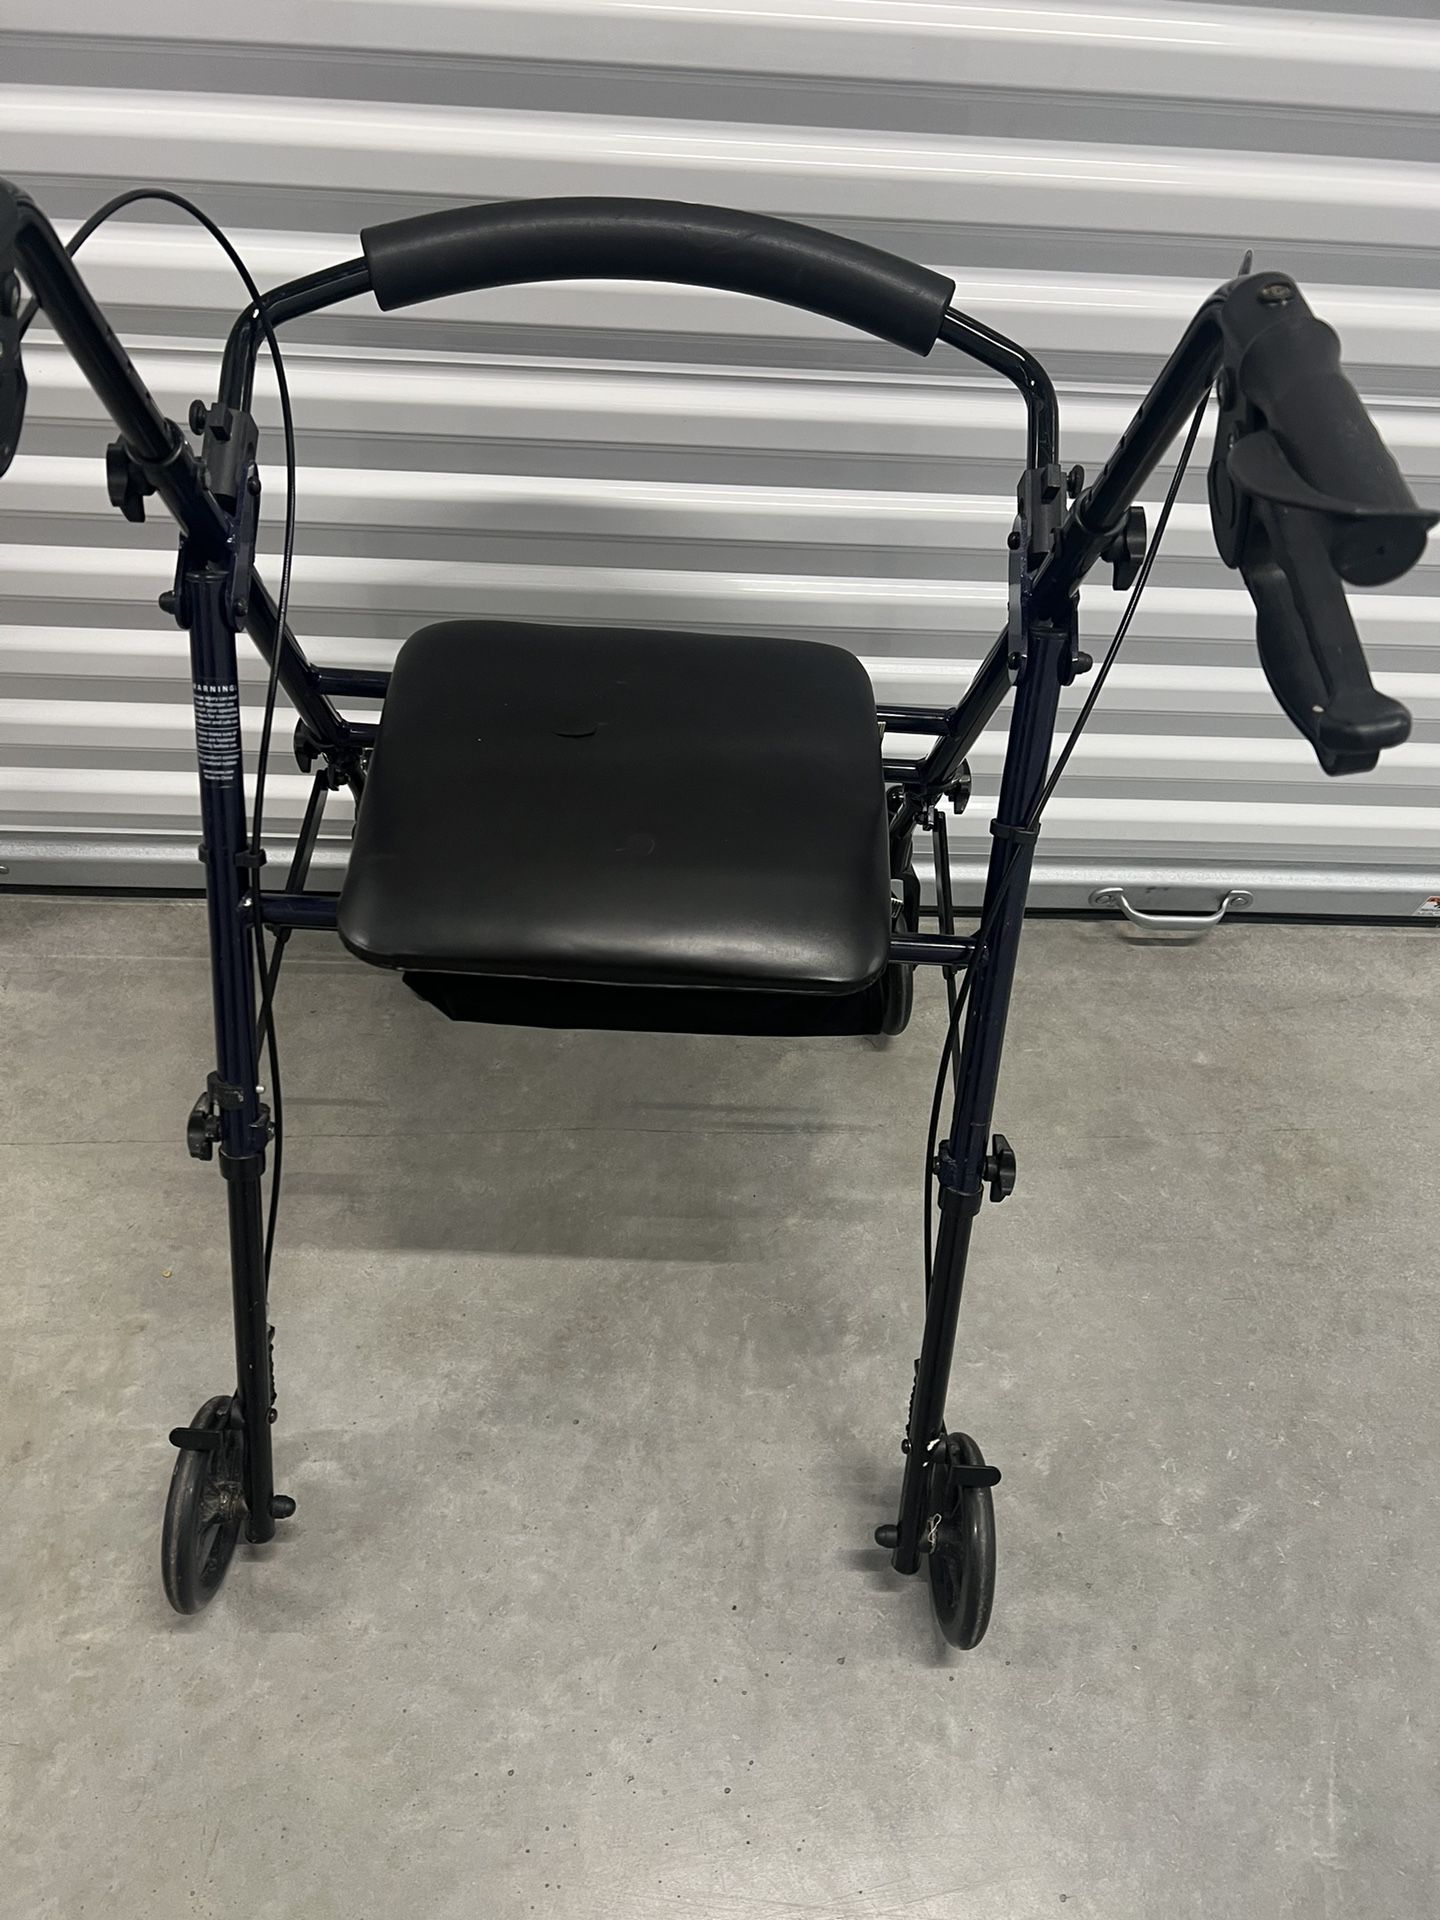 Carex medical walker with seat. Used in good condition with some cosmetic blemishes like scratches and scuff marks from prior usage. There is a small 